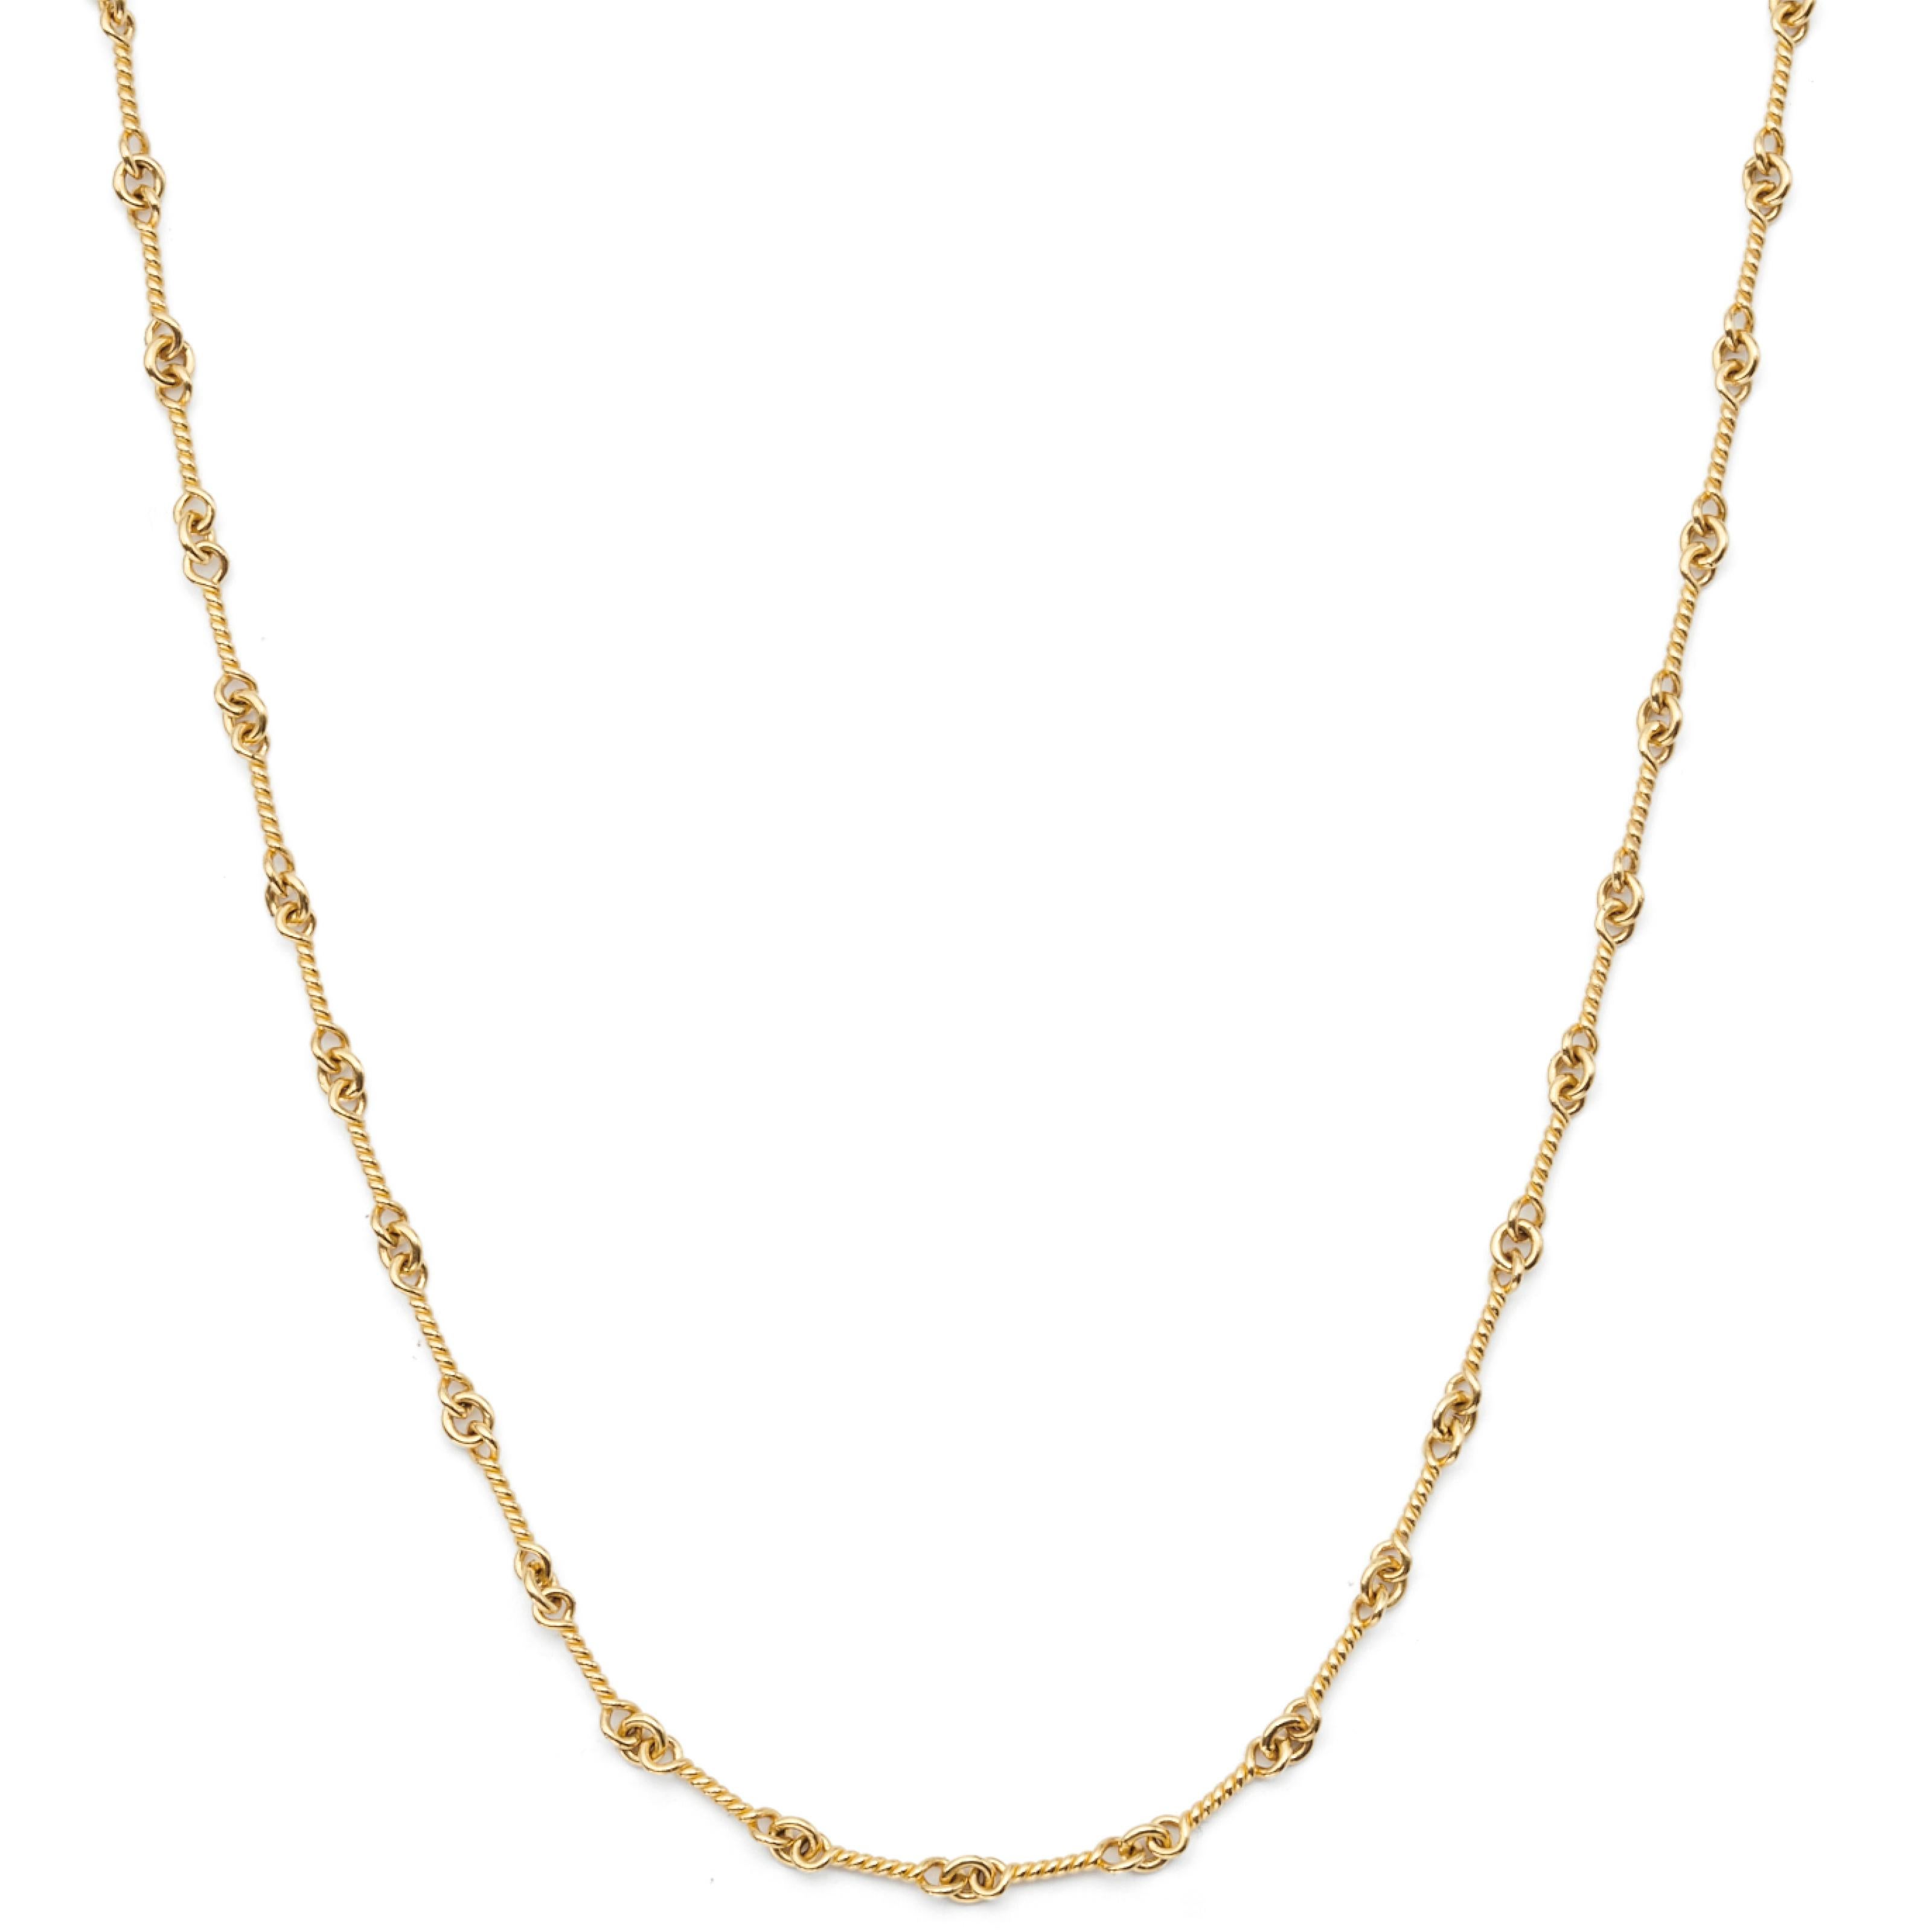 16-inch Twist Chain in 18kt Gold.

Available in five lengths.
7-inch, 16-inch, 18-inch, 20-inch and 24-inch